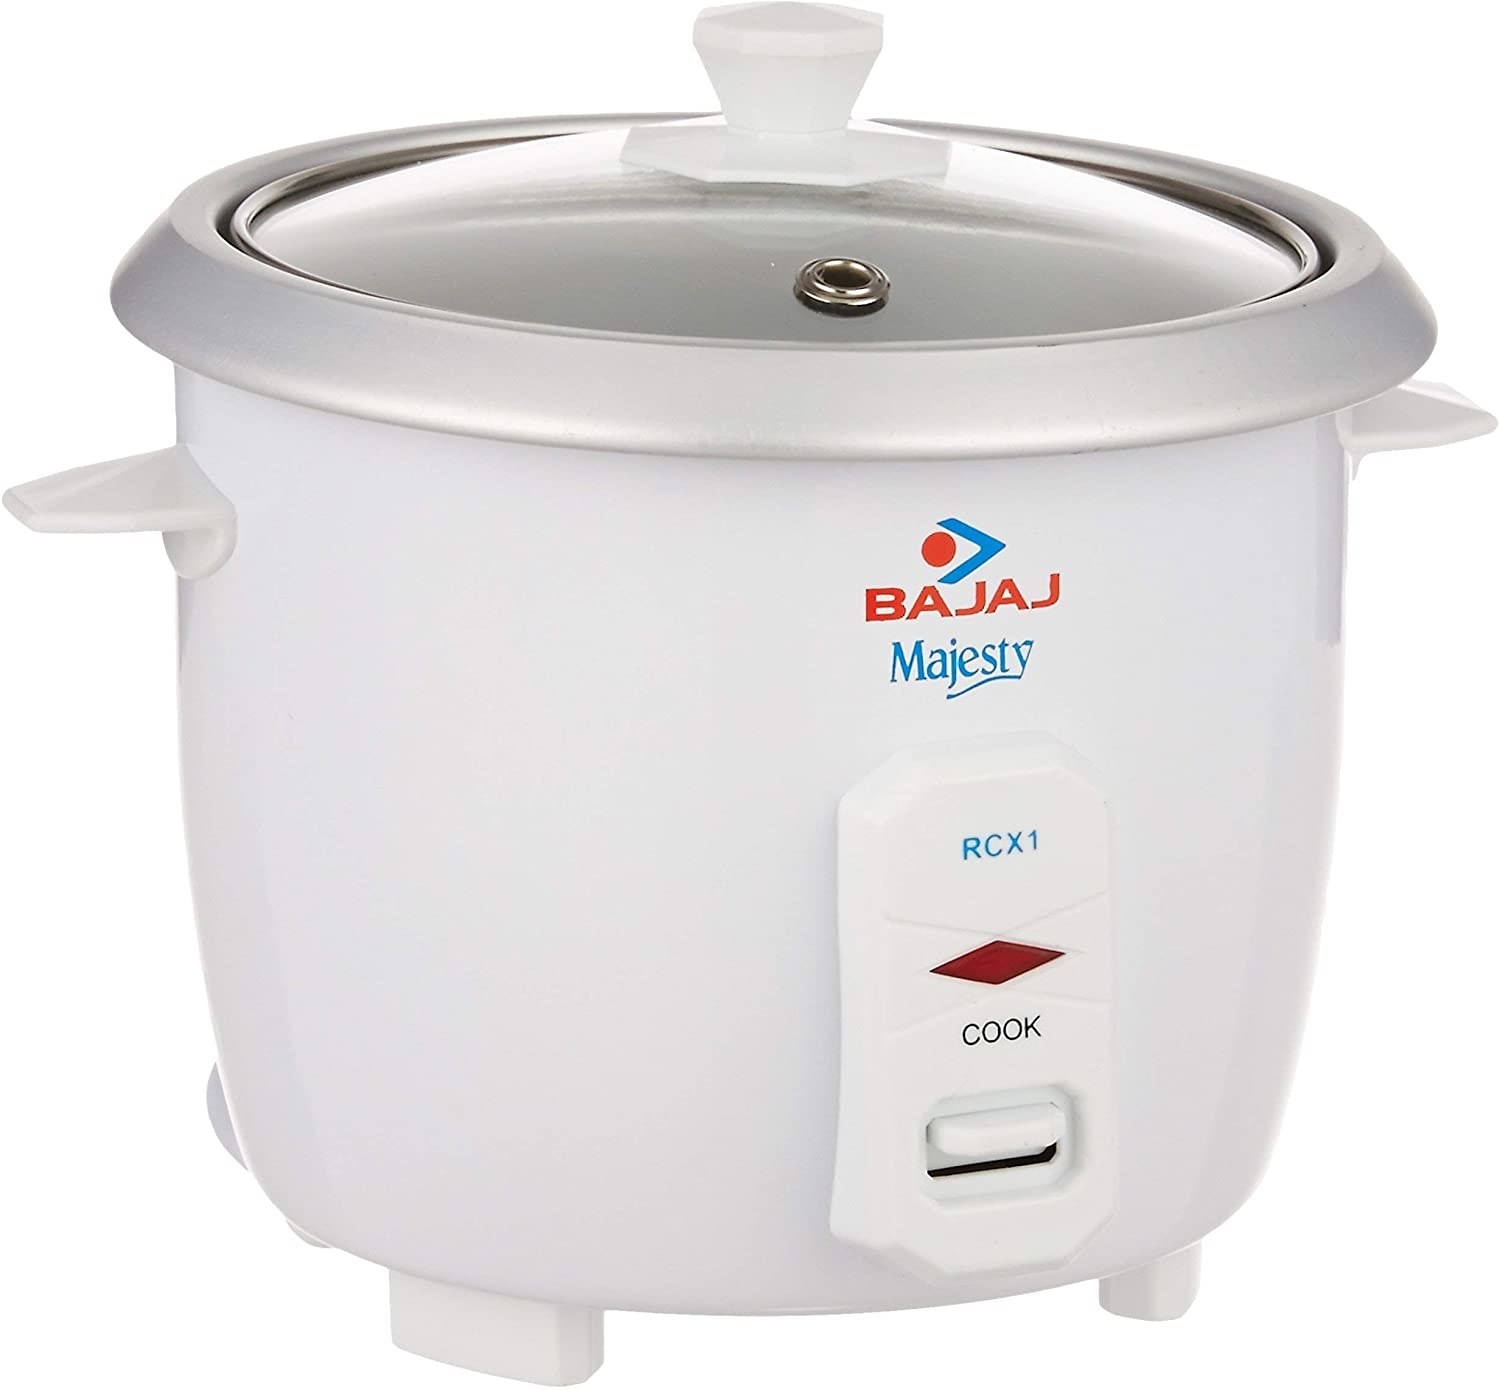 A rice cooker 